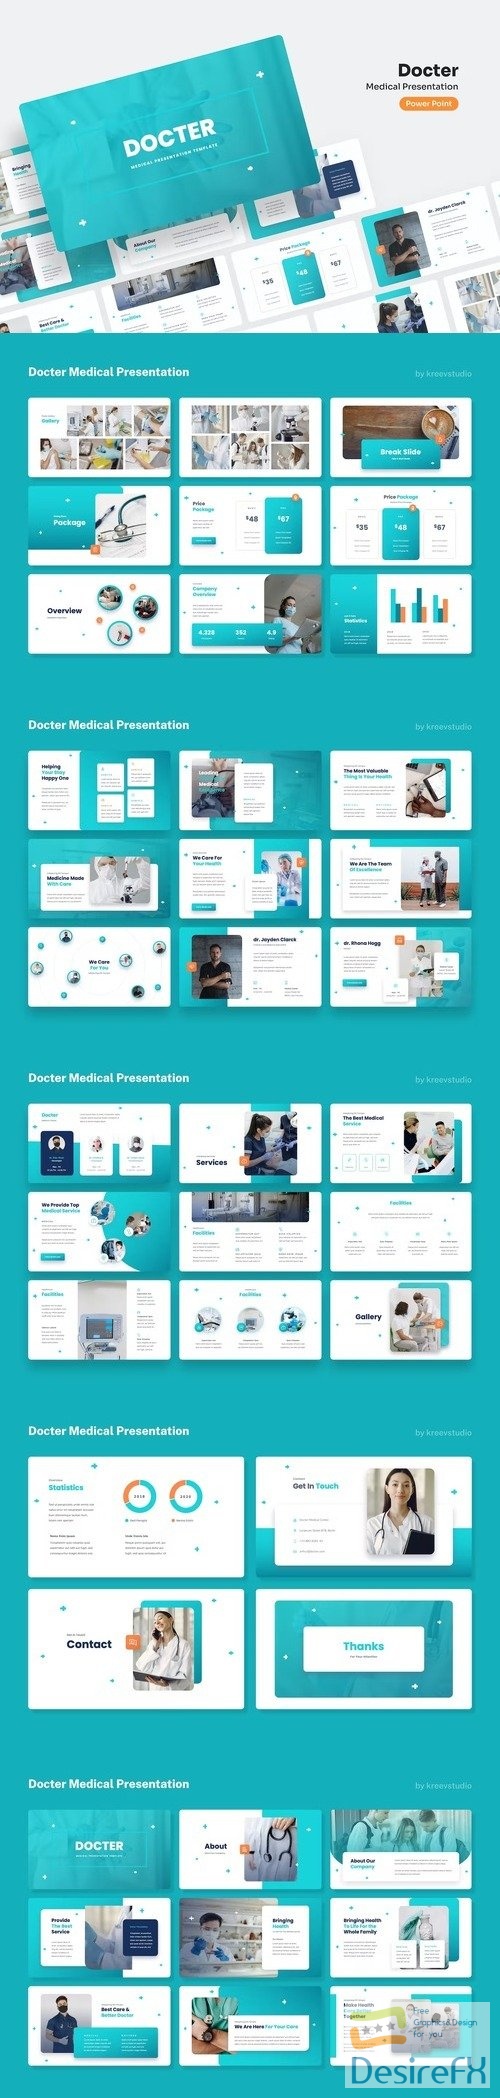 Docter - Medical PowerPoint Presentation